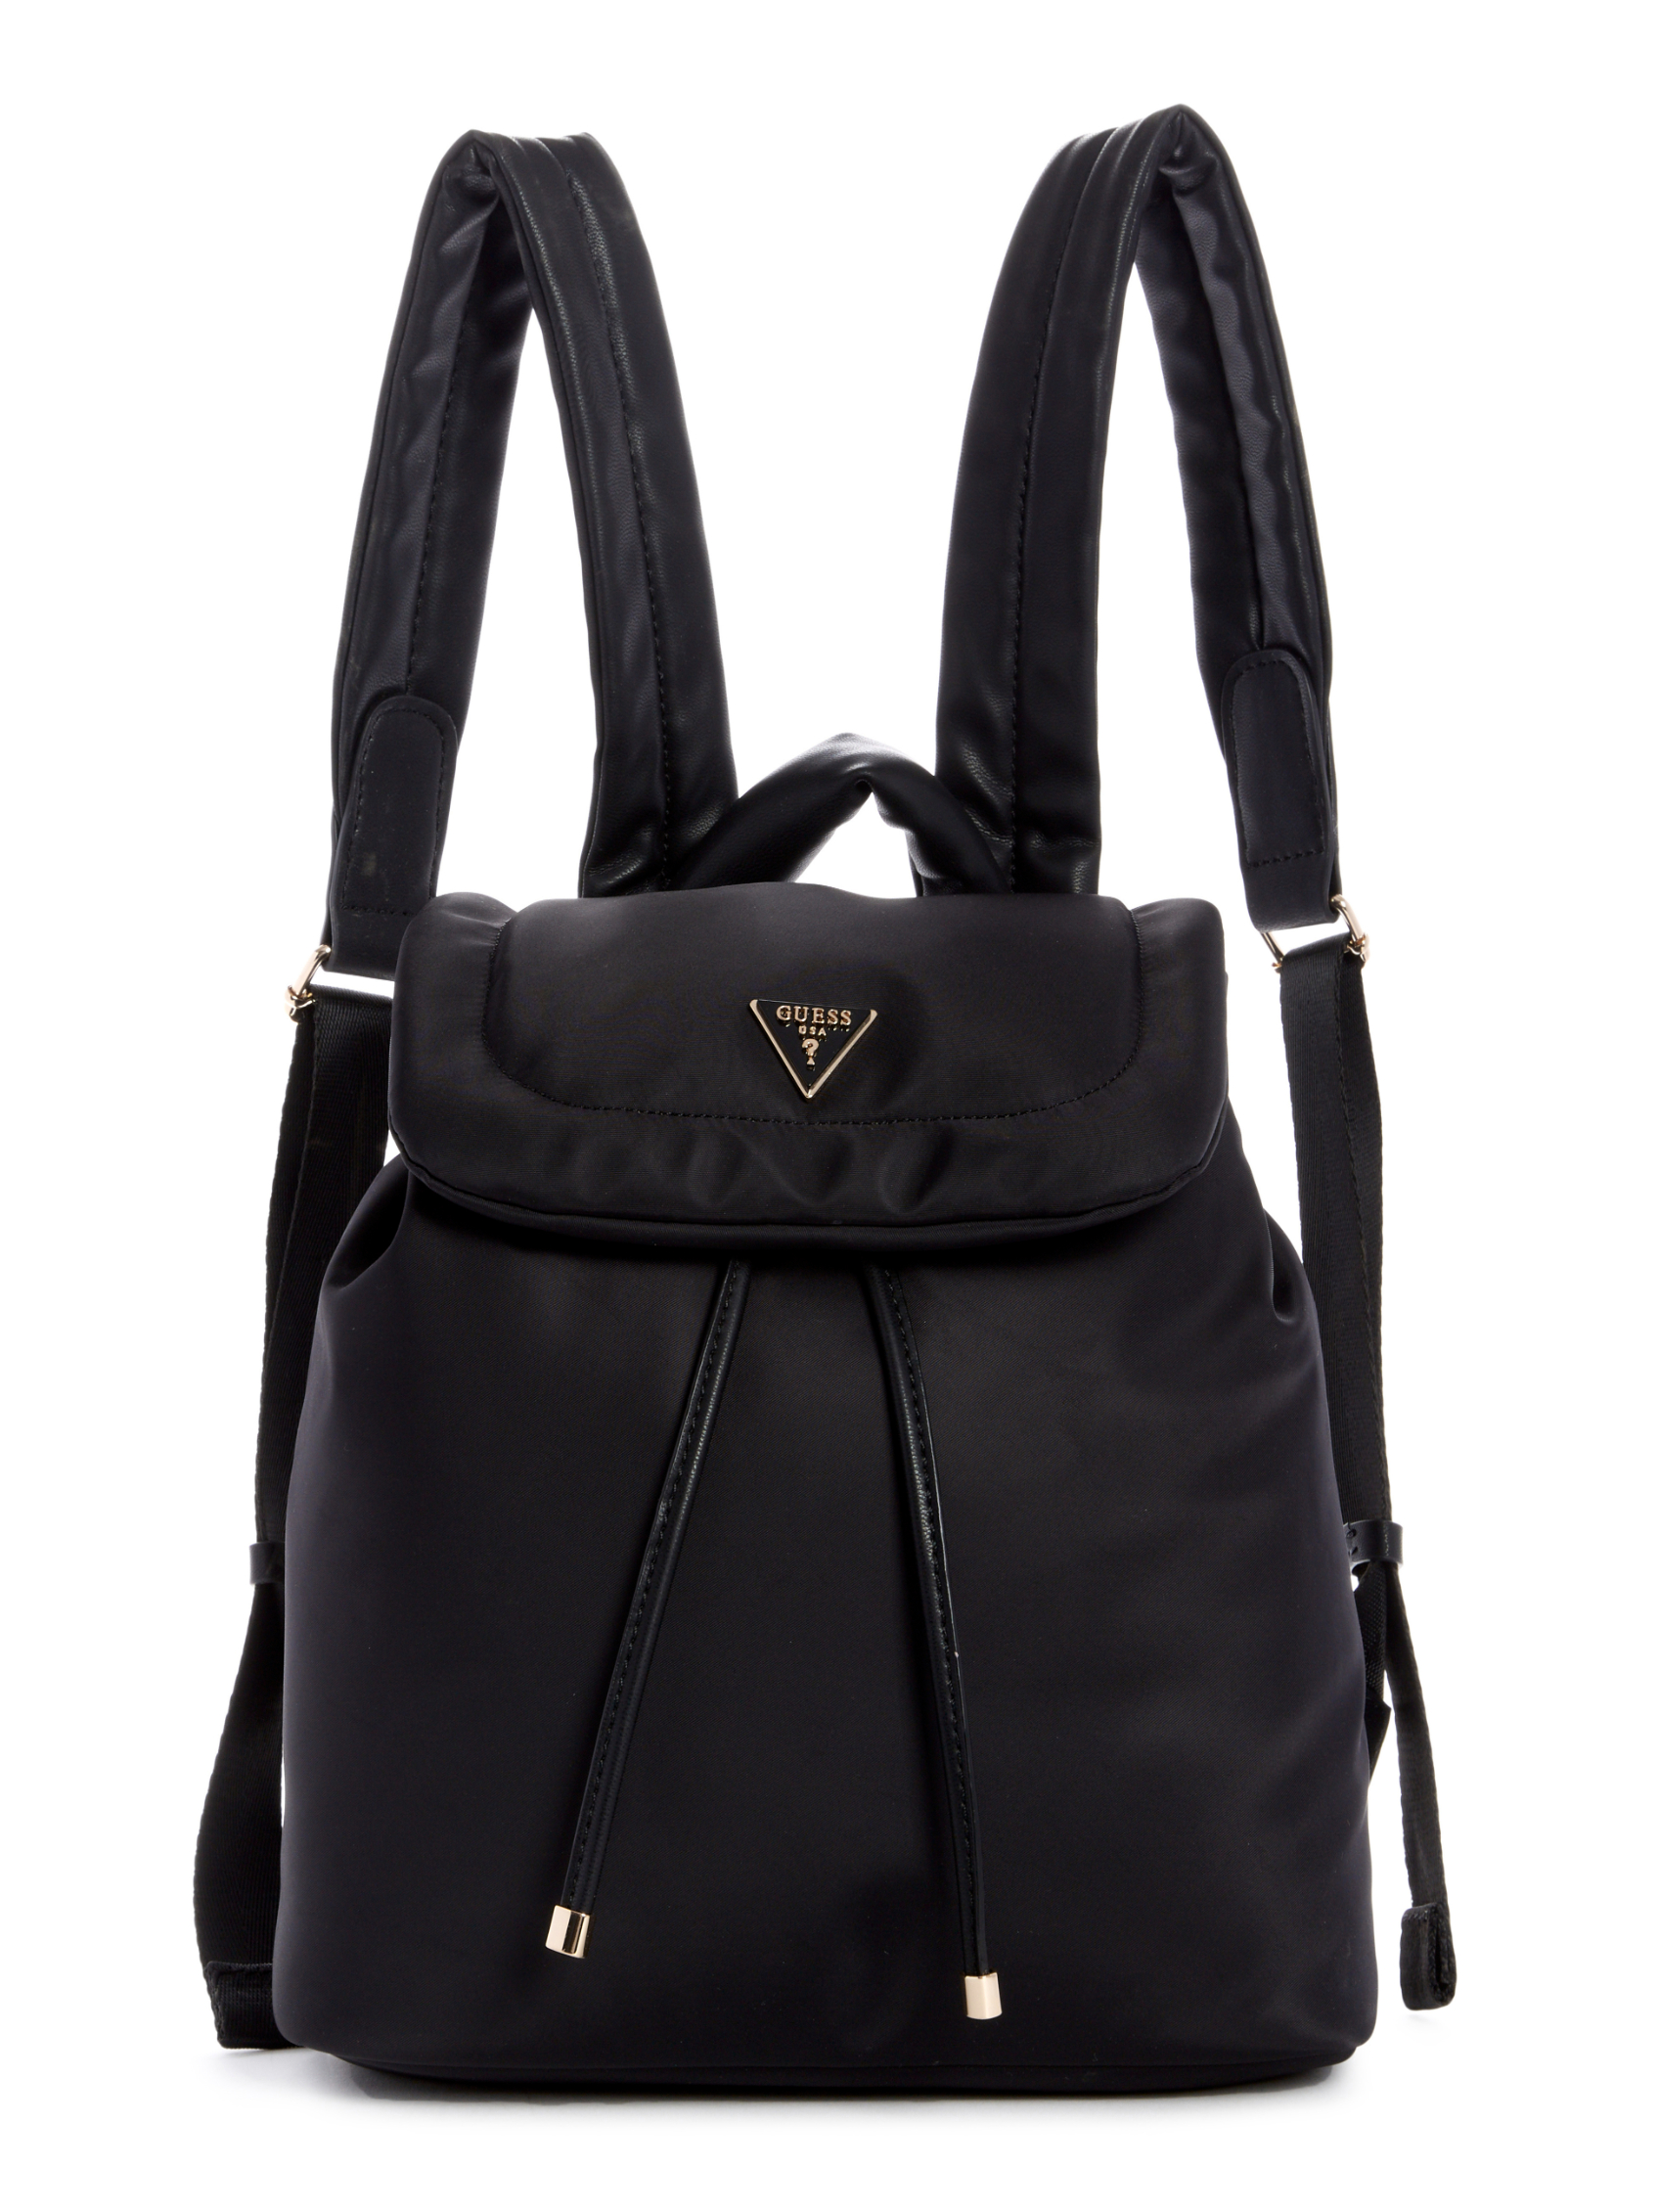 SHARMA FLAP BACKPACK | Guess Philippines